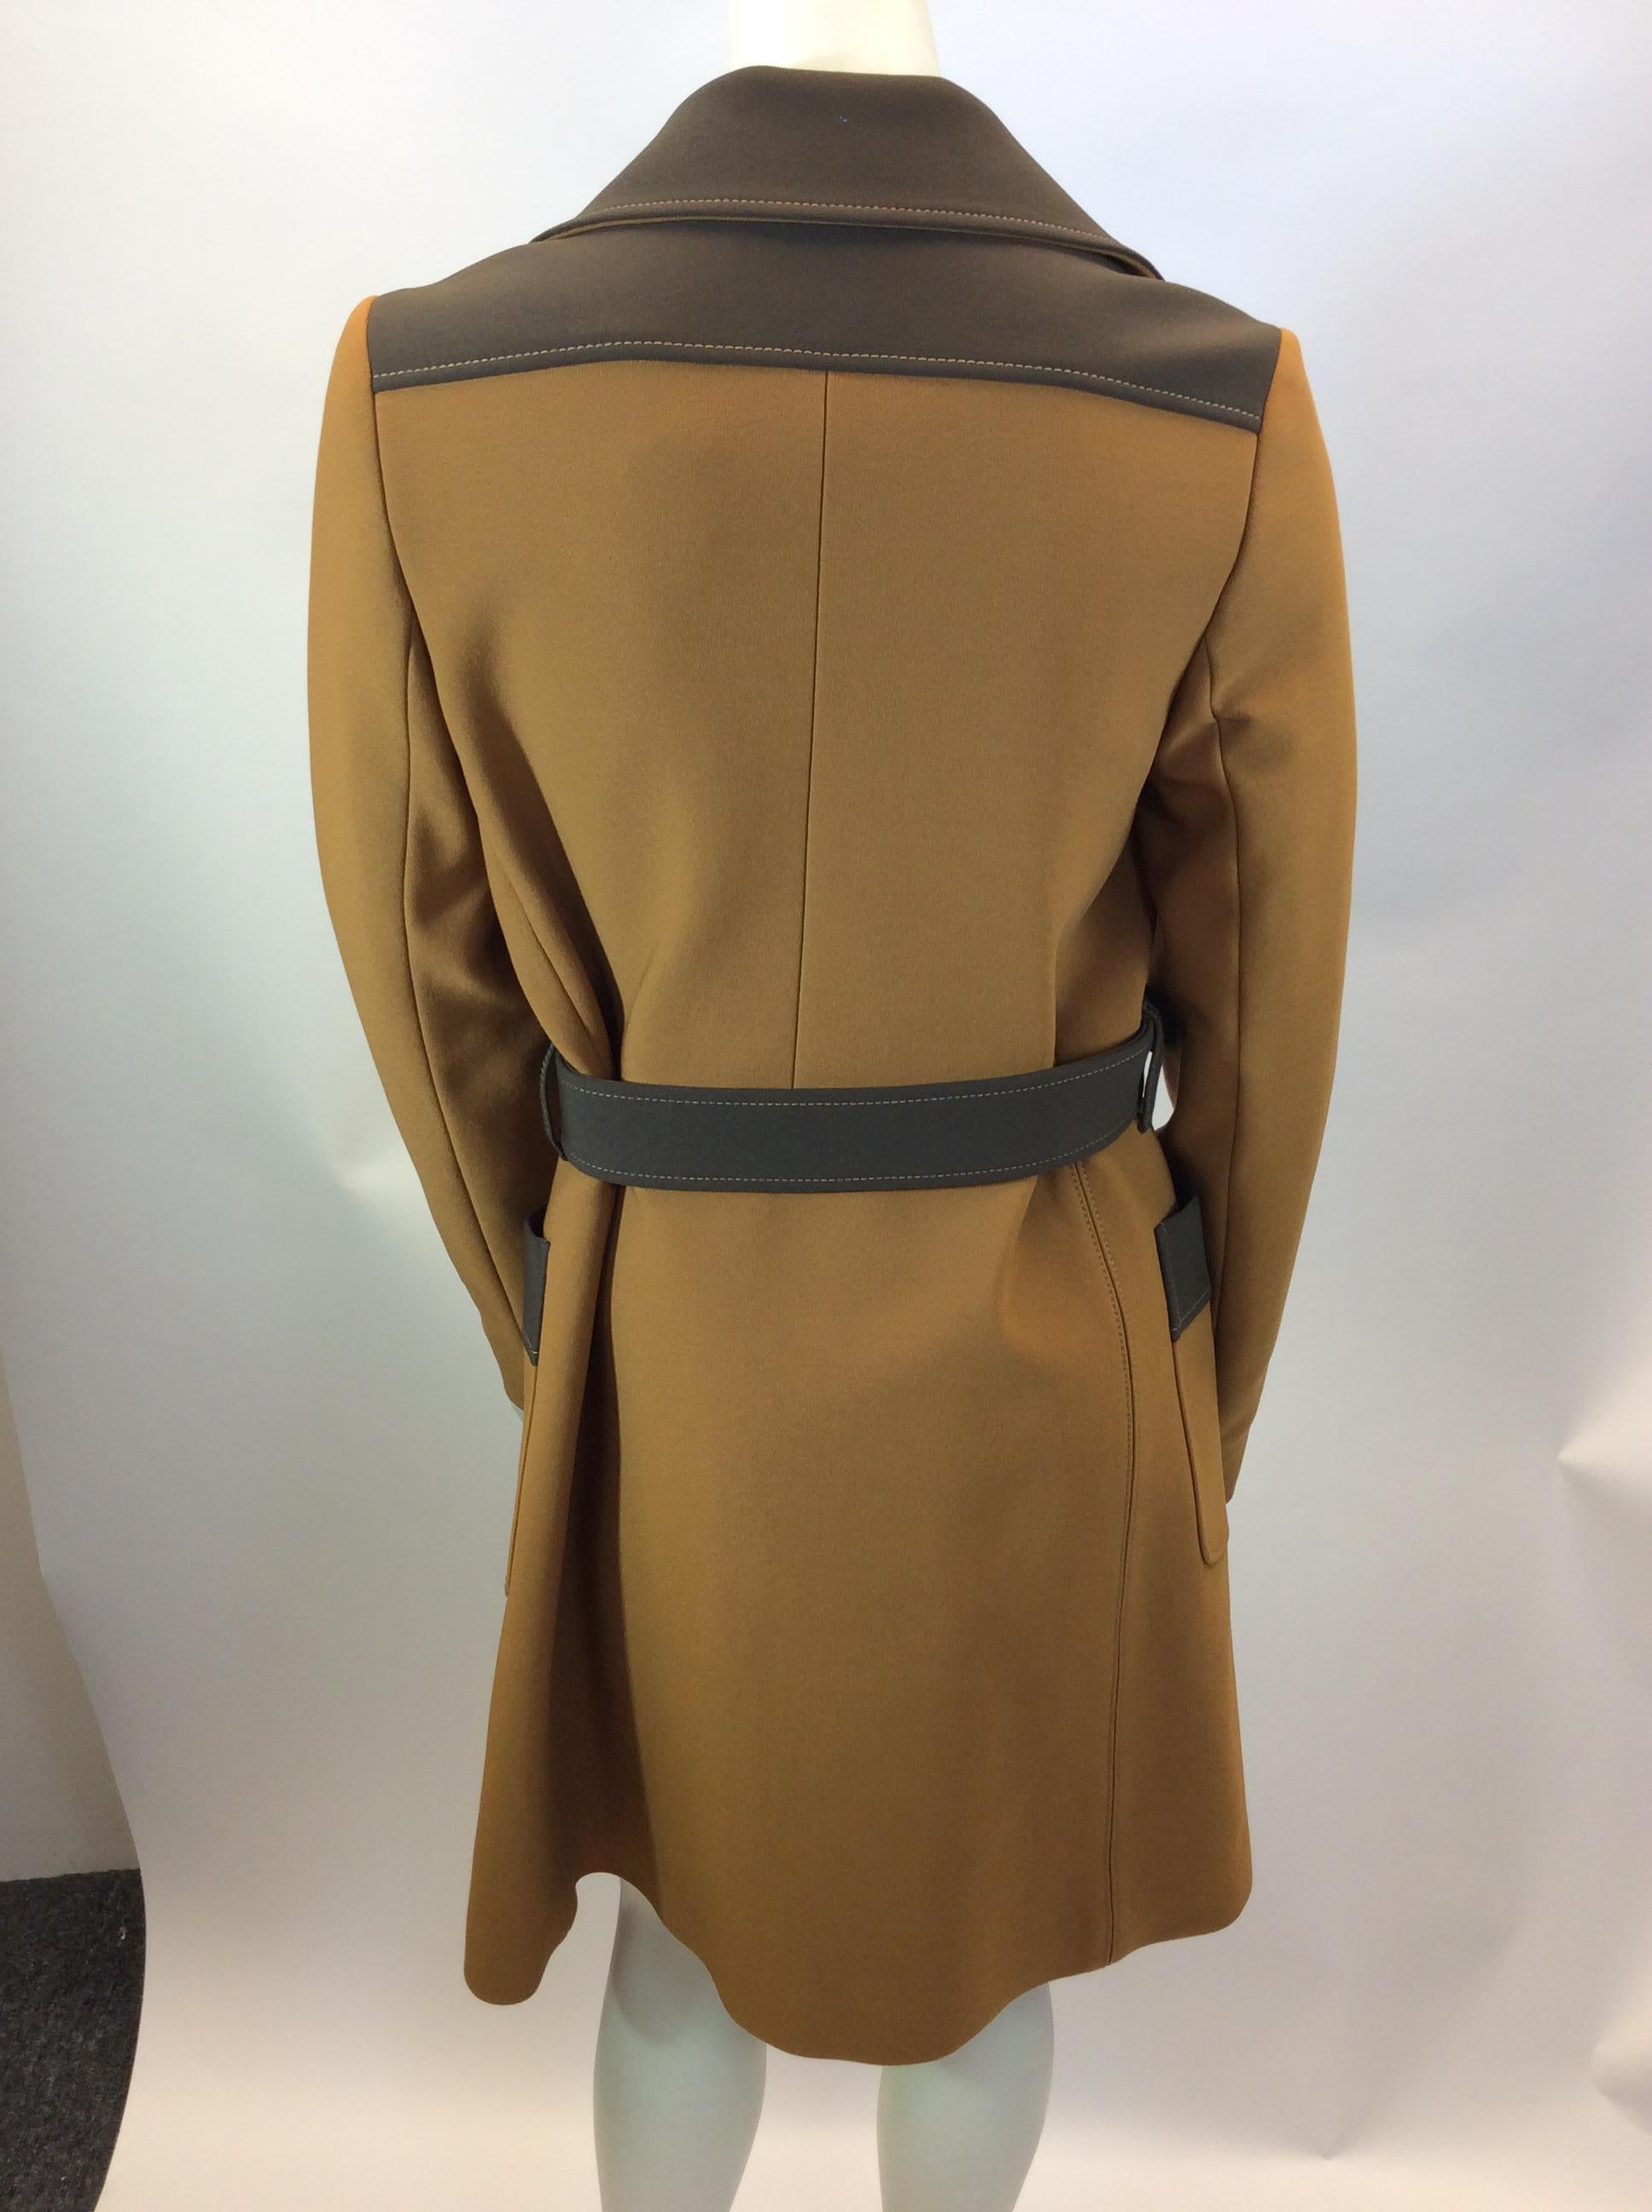 Prada Tan and Brown Belted Coat In Excellent Condition For Sale In Narberth, PA